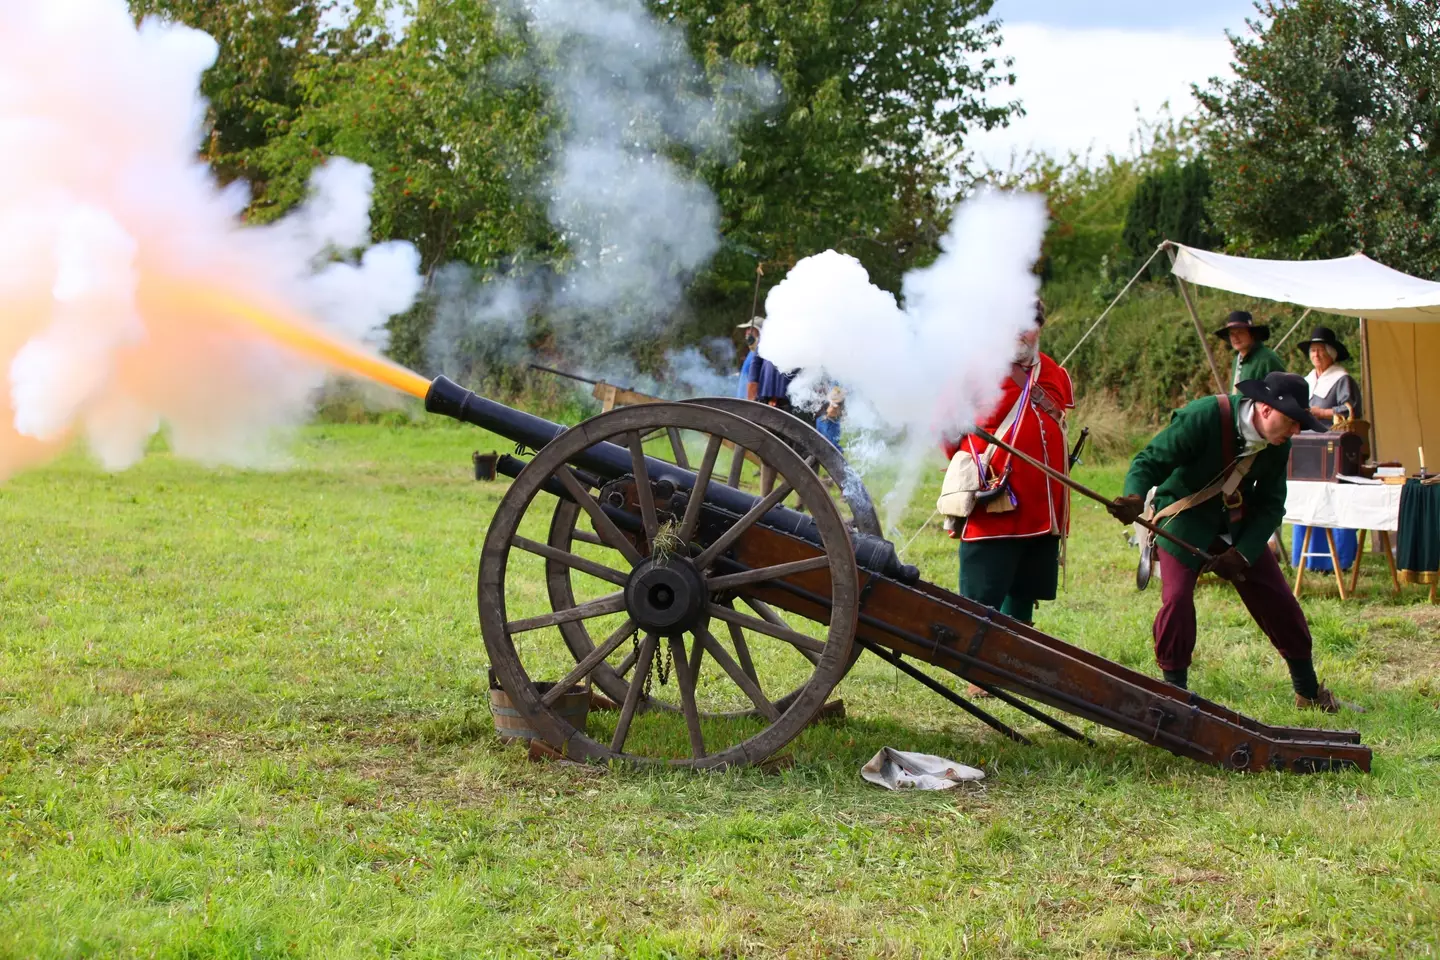 The nursery rhyme might actually be about a cannon from the English Civil War.